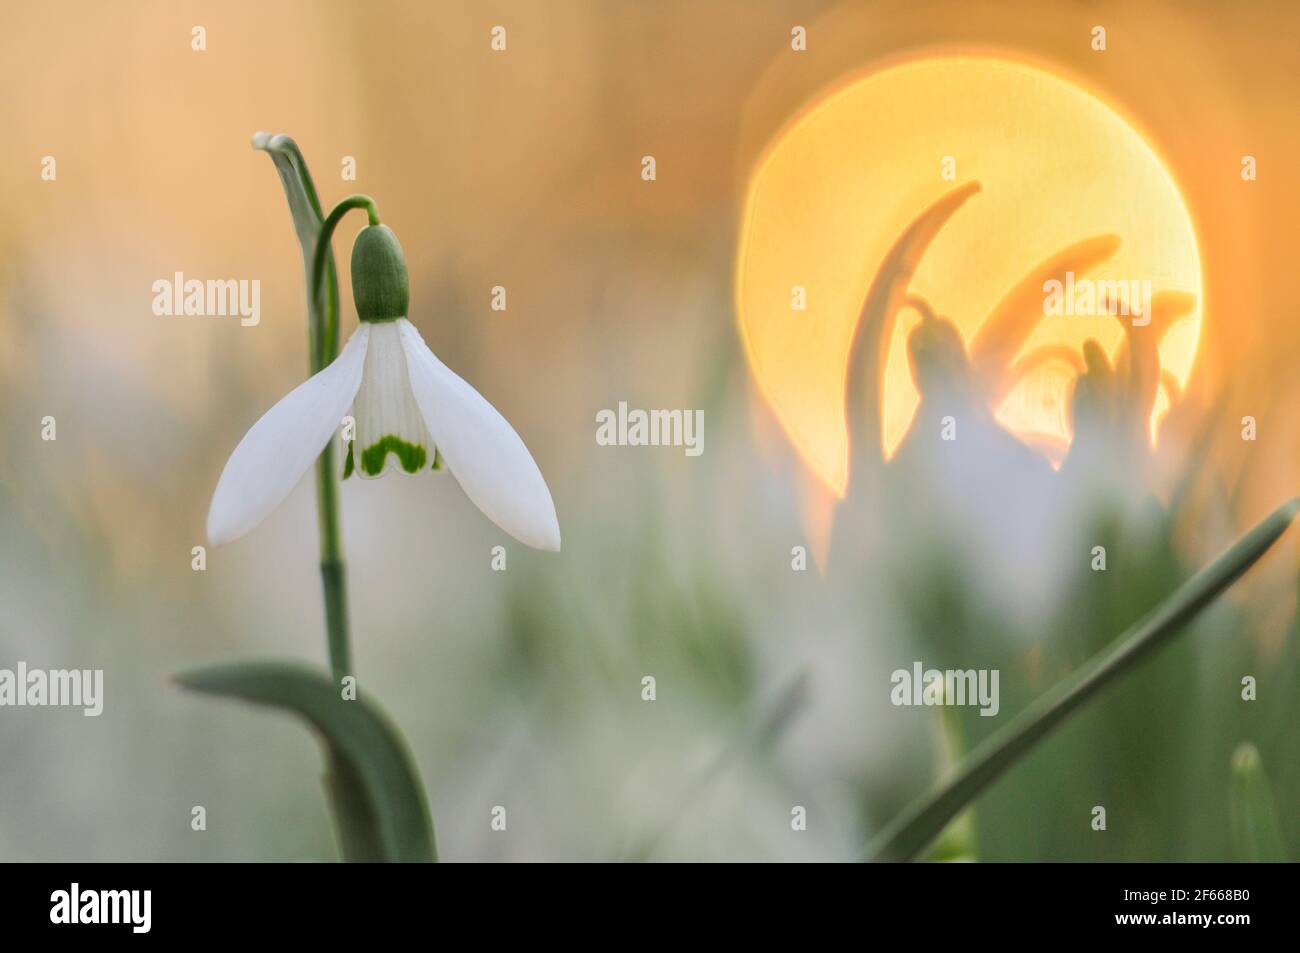 Group of blooming snowdrops in pastel colors with the sun rising in the background Stock Photo